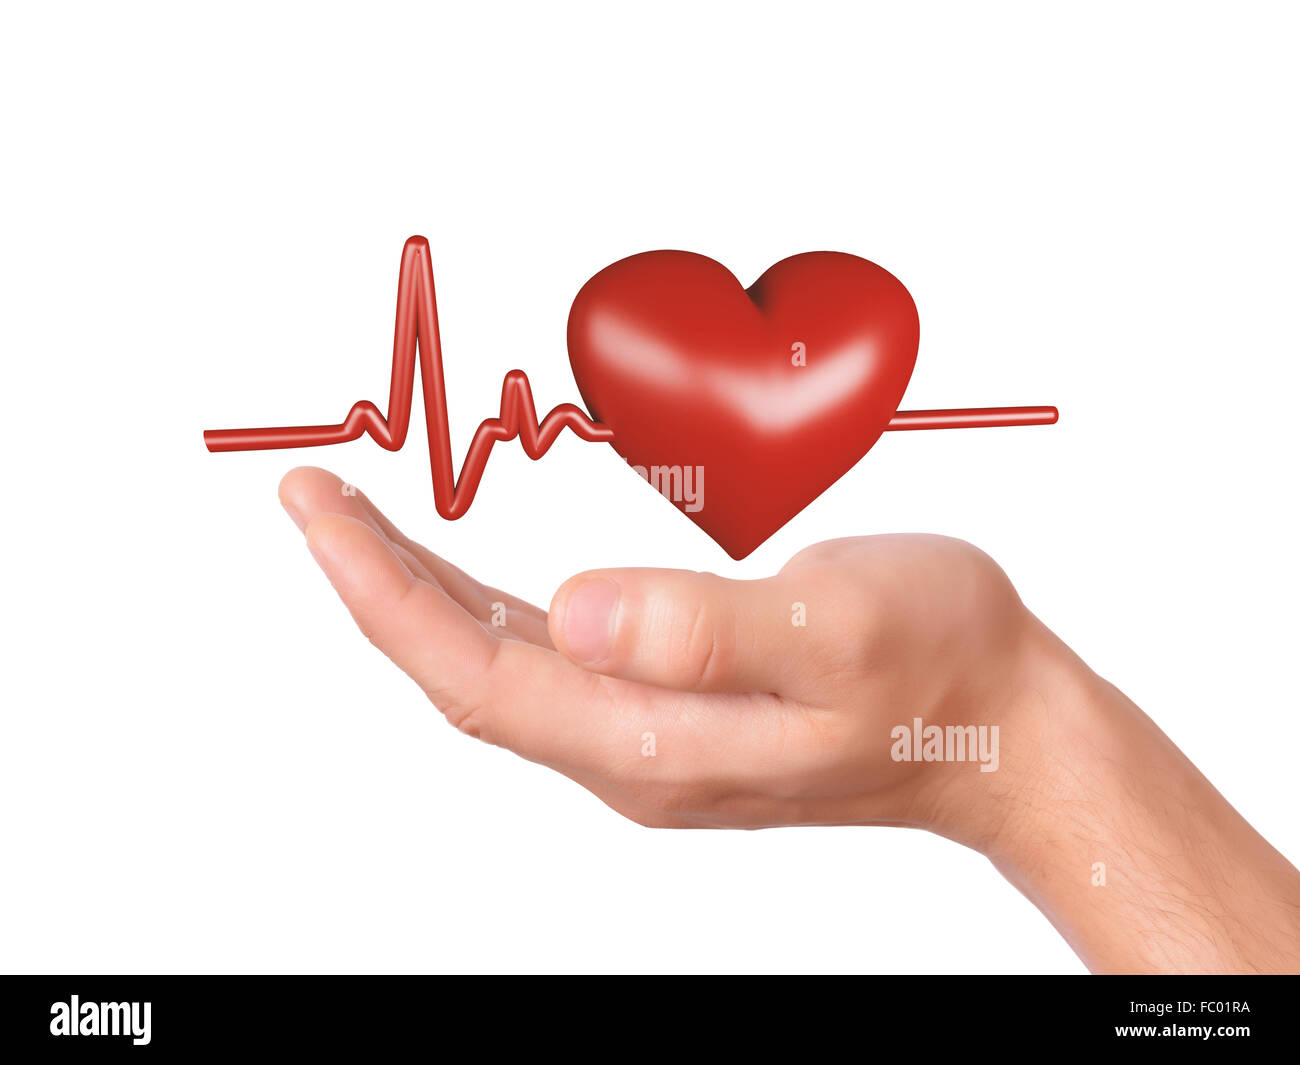 hand holding red heart. healthcare and medicine concept Stock Photo